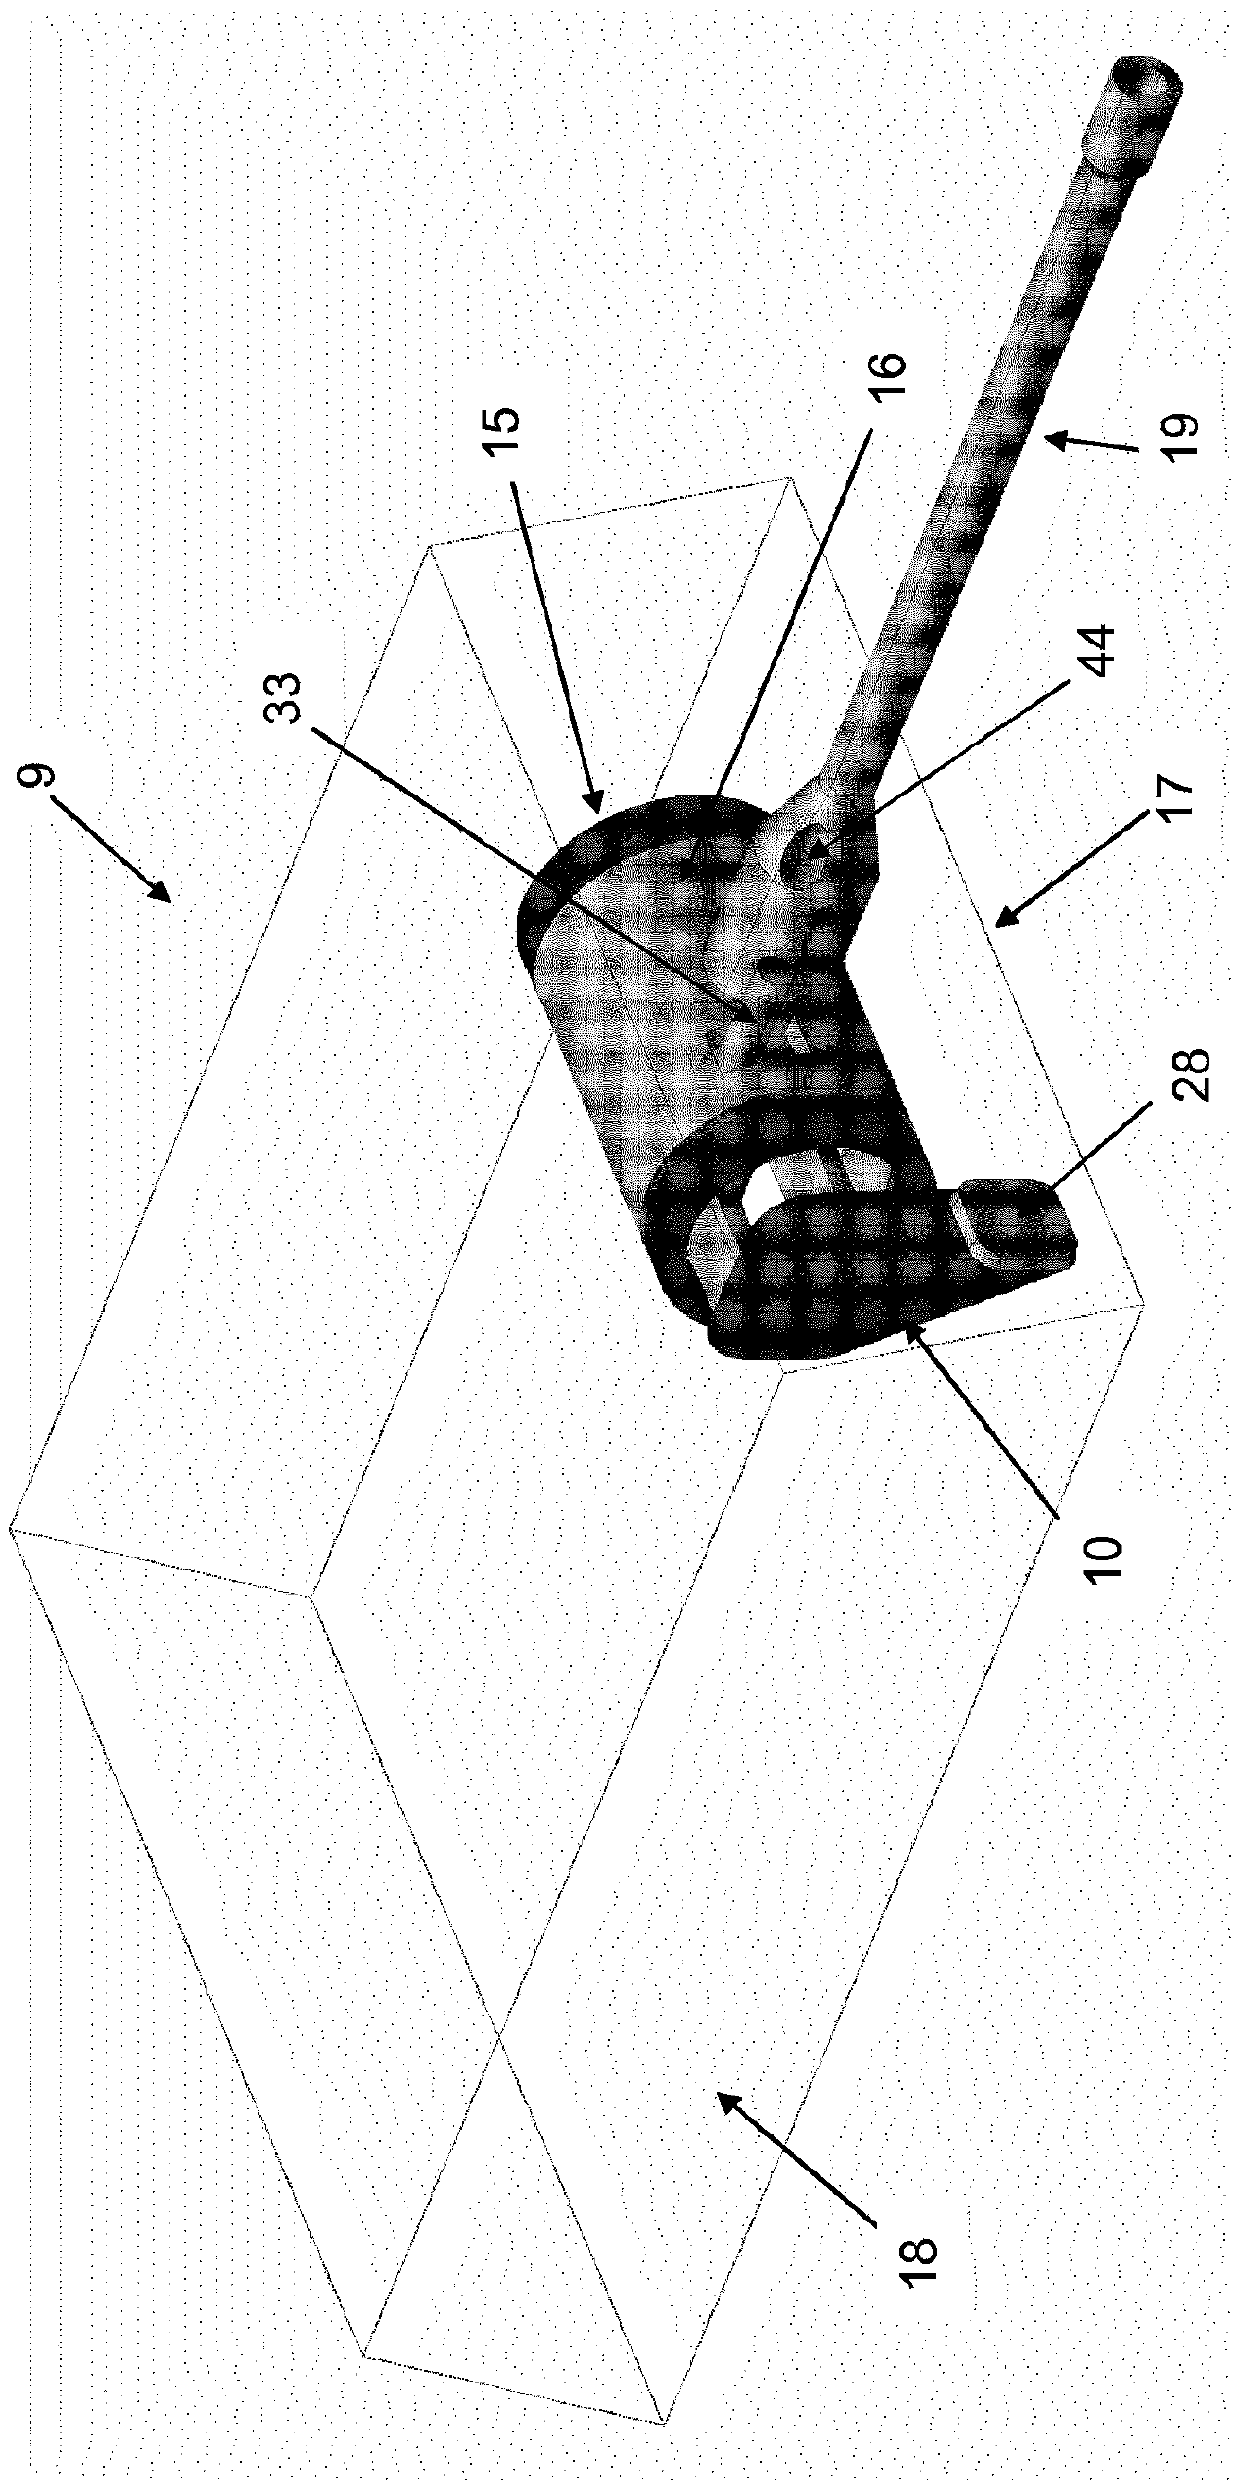 Device for ejecting cartridges and/or links from a chain or ammunition strip connected to a main and/or secondary weapon